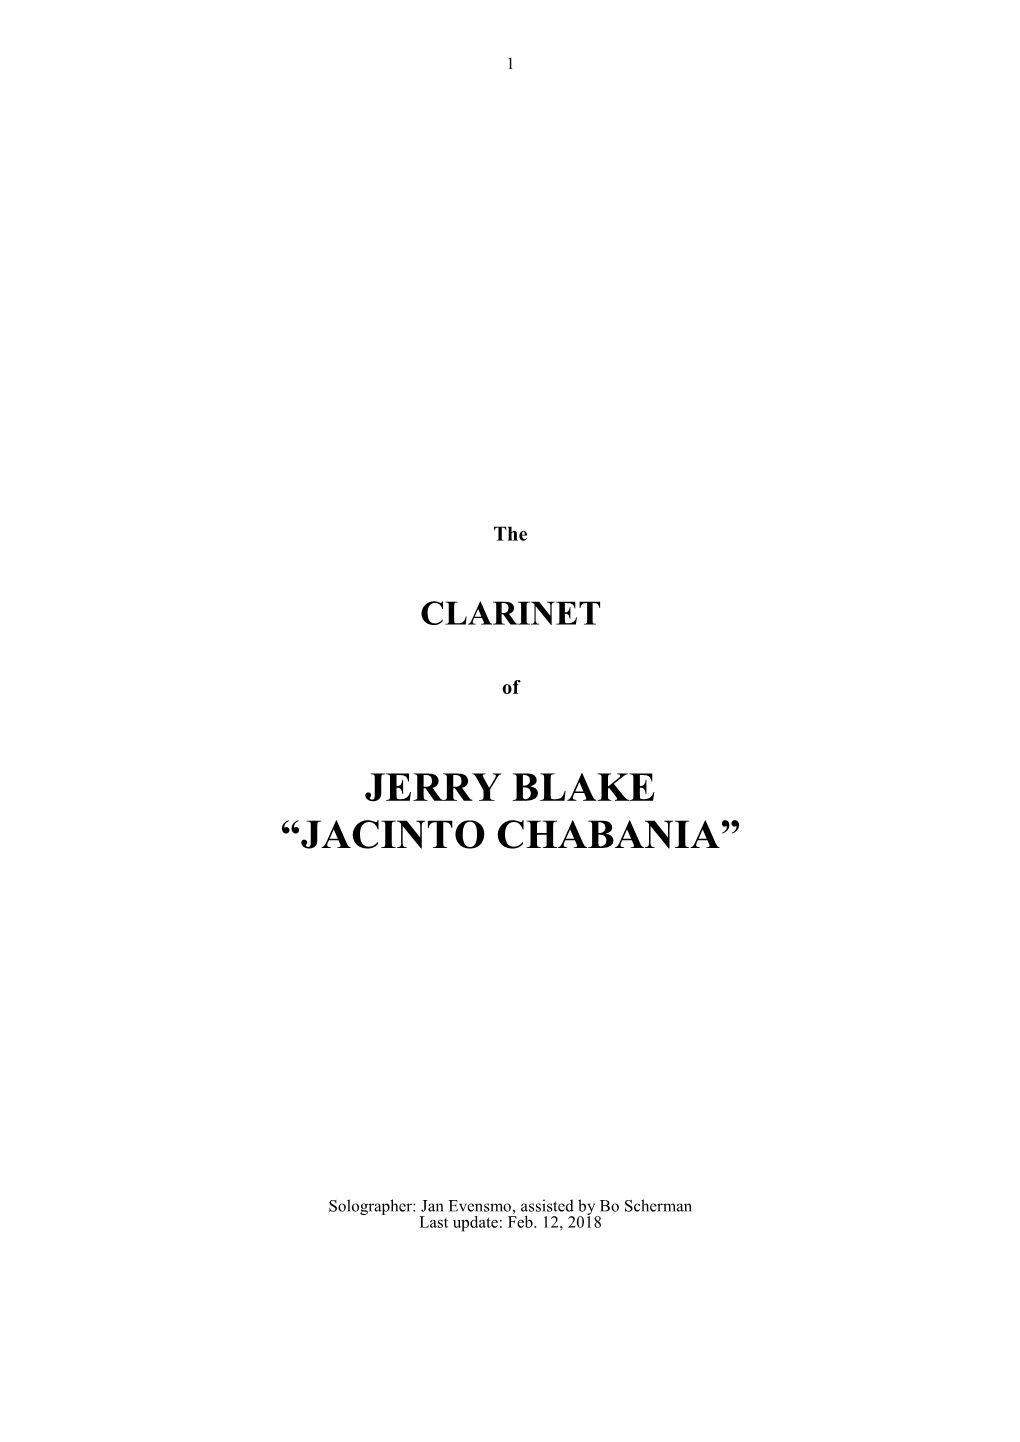 Download the CLARINET of Jerry Blake